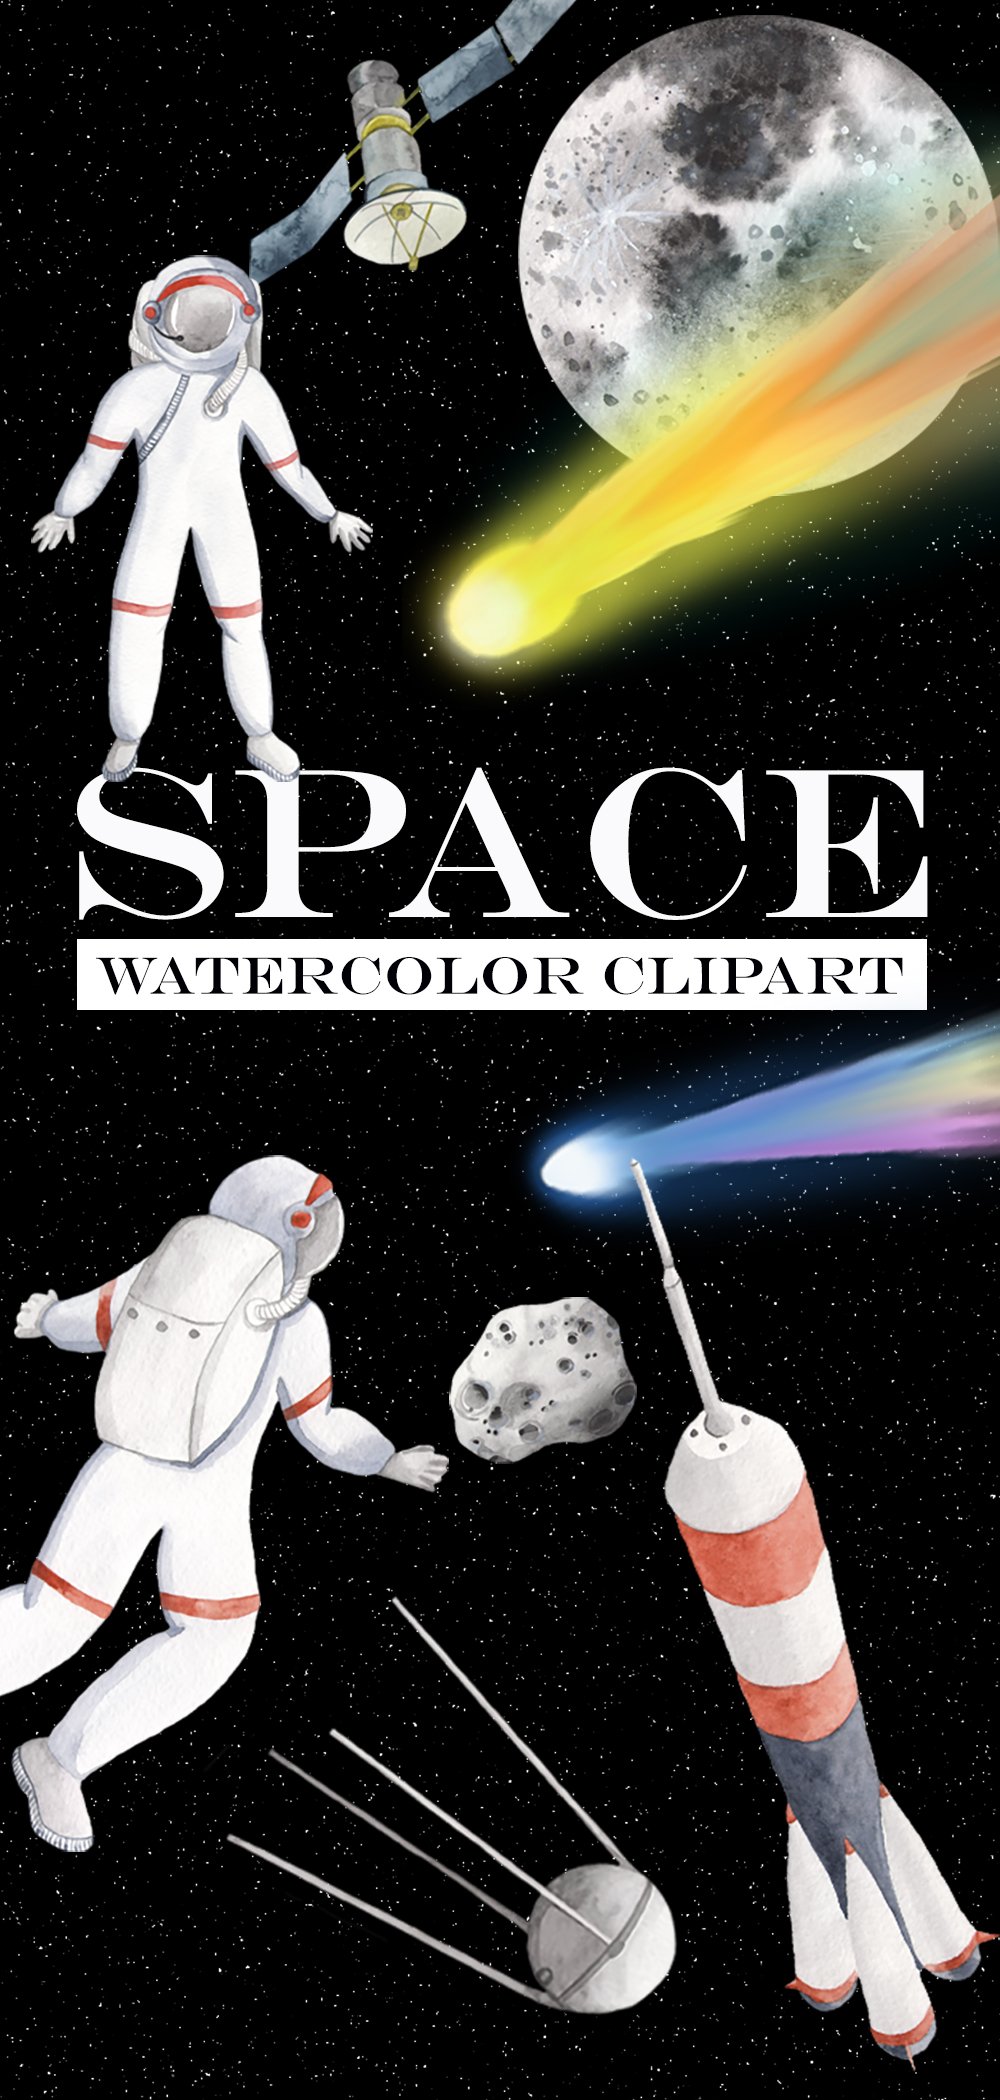 Space Watercolor clipart preview image.